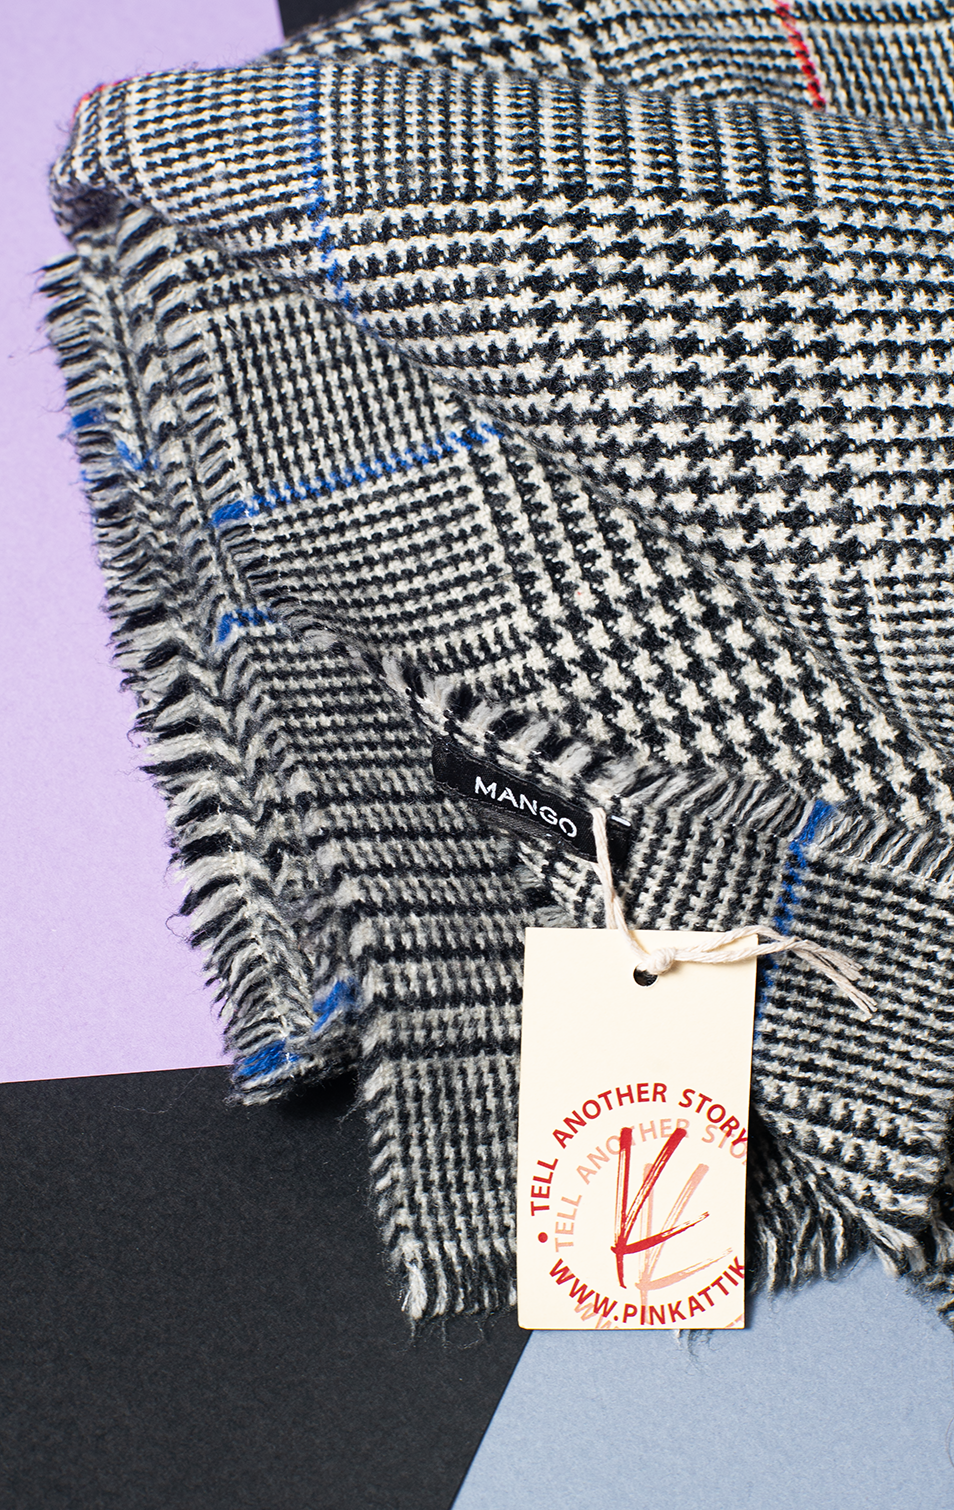 MANGO SCARF - Houndstooth black & white with blue & red lines - 200 x 95 cm